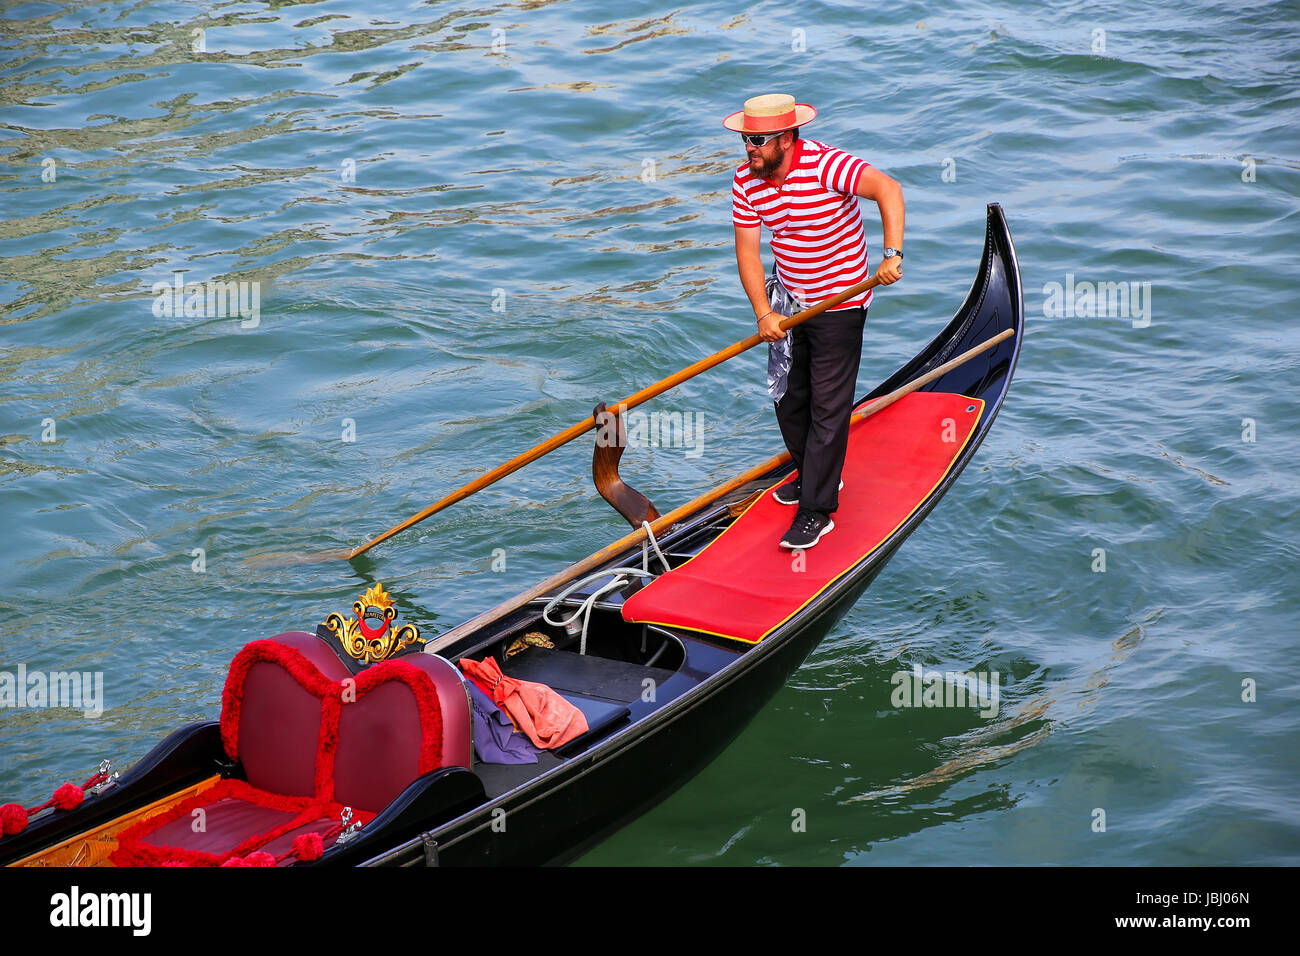 Man rowing gondola in Venice, Italy. Venice is situated across a group of 117 small islands that are separated by canals and linked by bridges. Stock Photo